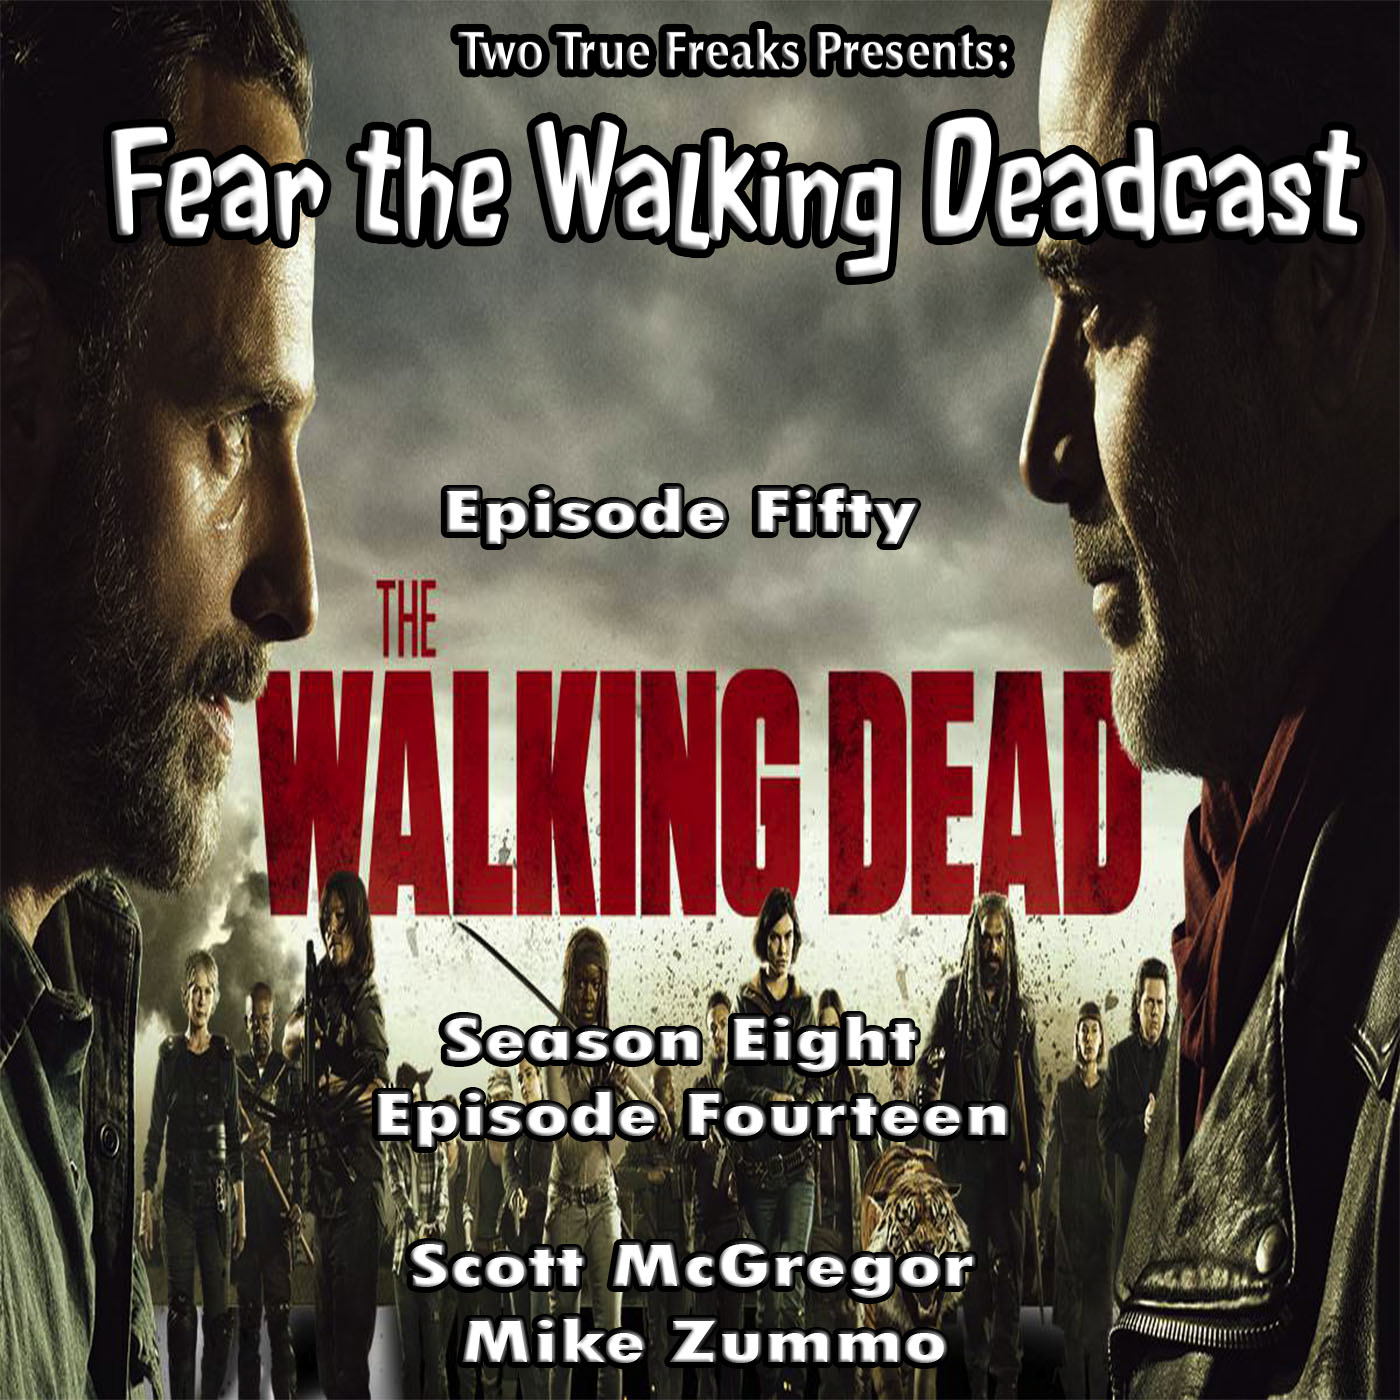 fearthedeadcastEP50TWDSE8EP14.jpg